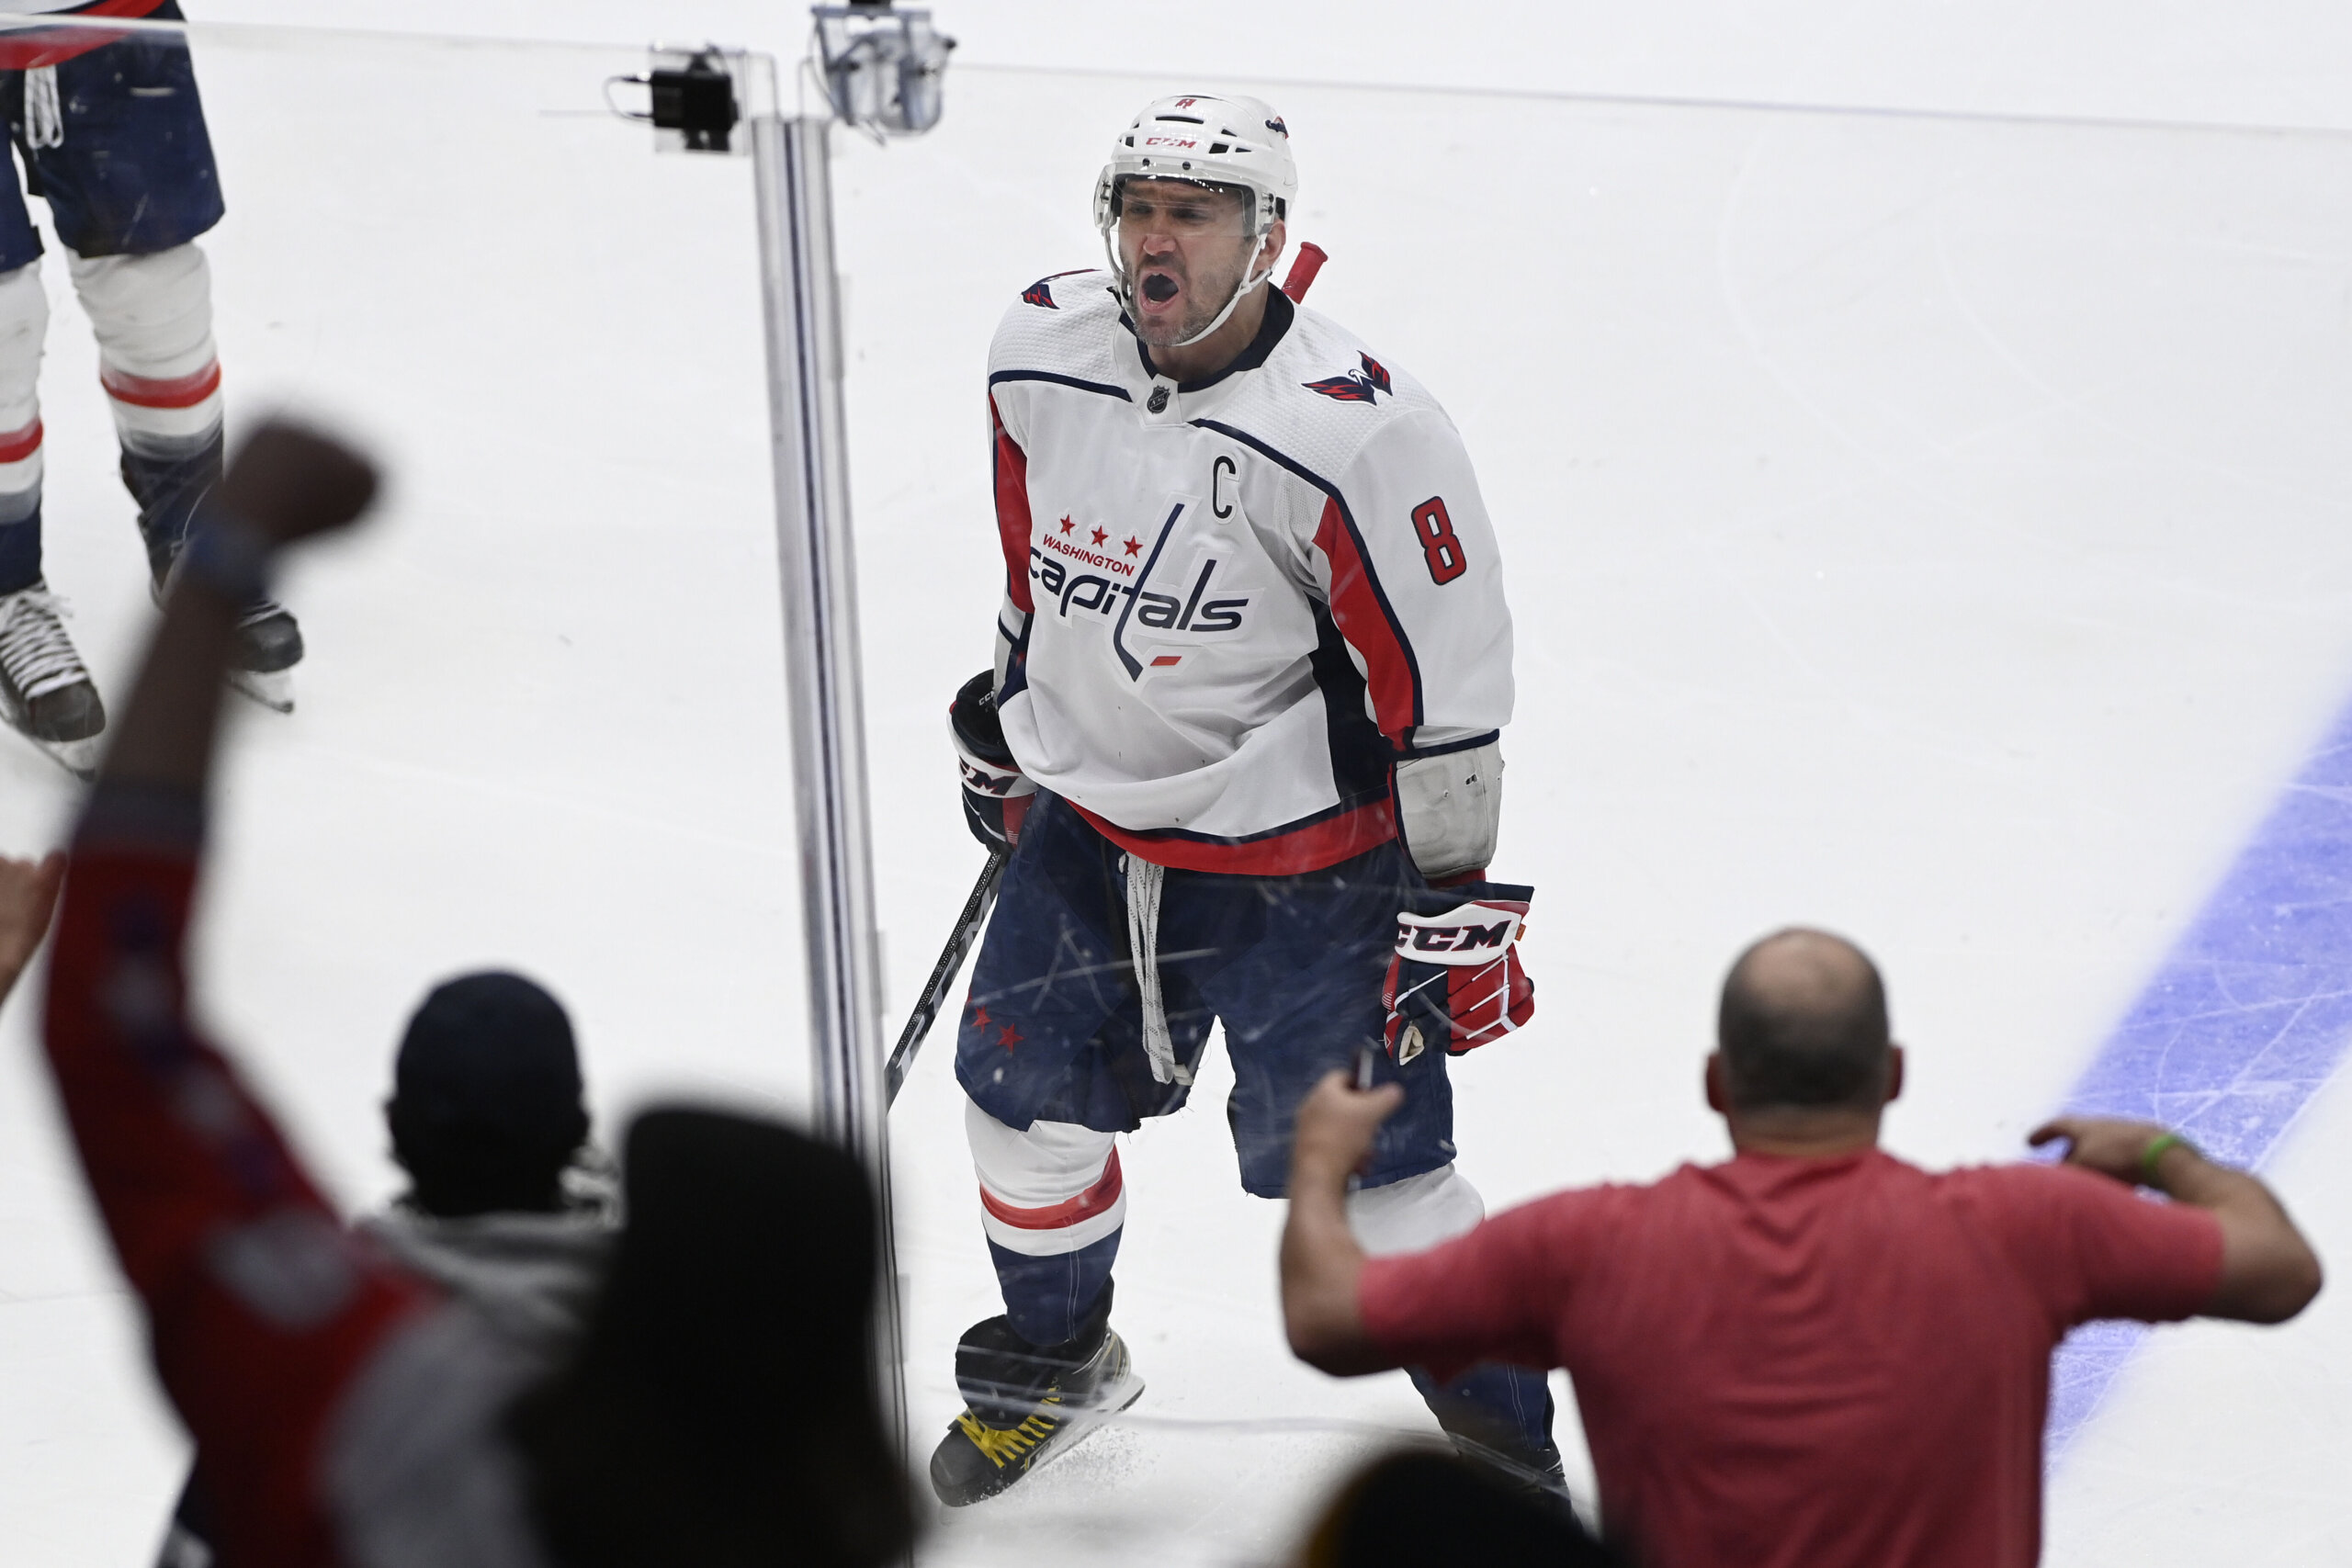 Alex Ovechkin Briefly Leaves Game 5 After a Hard Hit - The New York Times